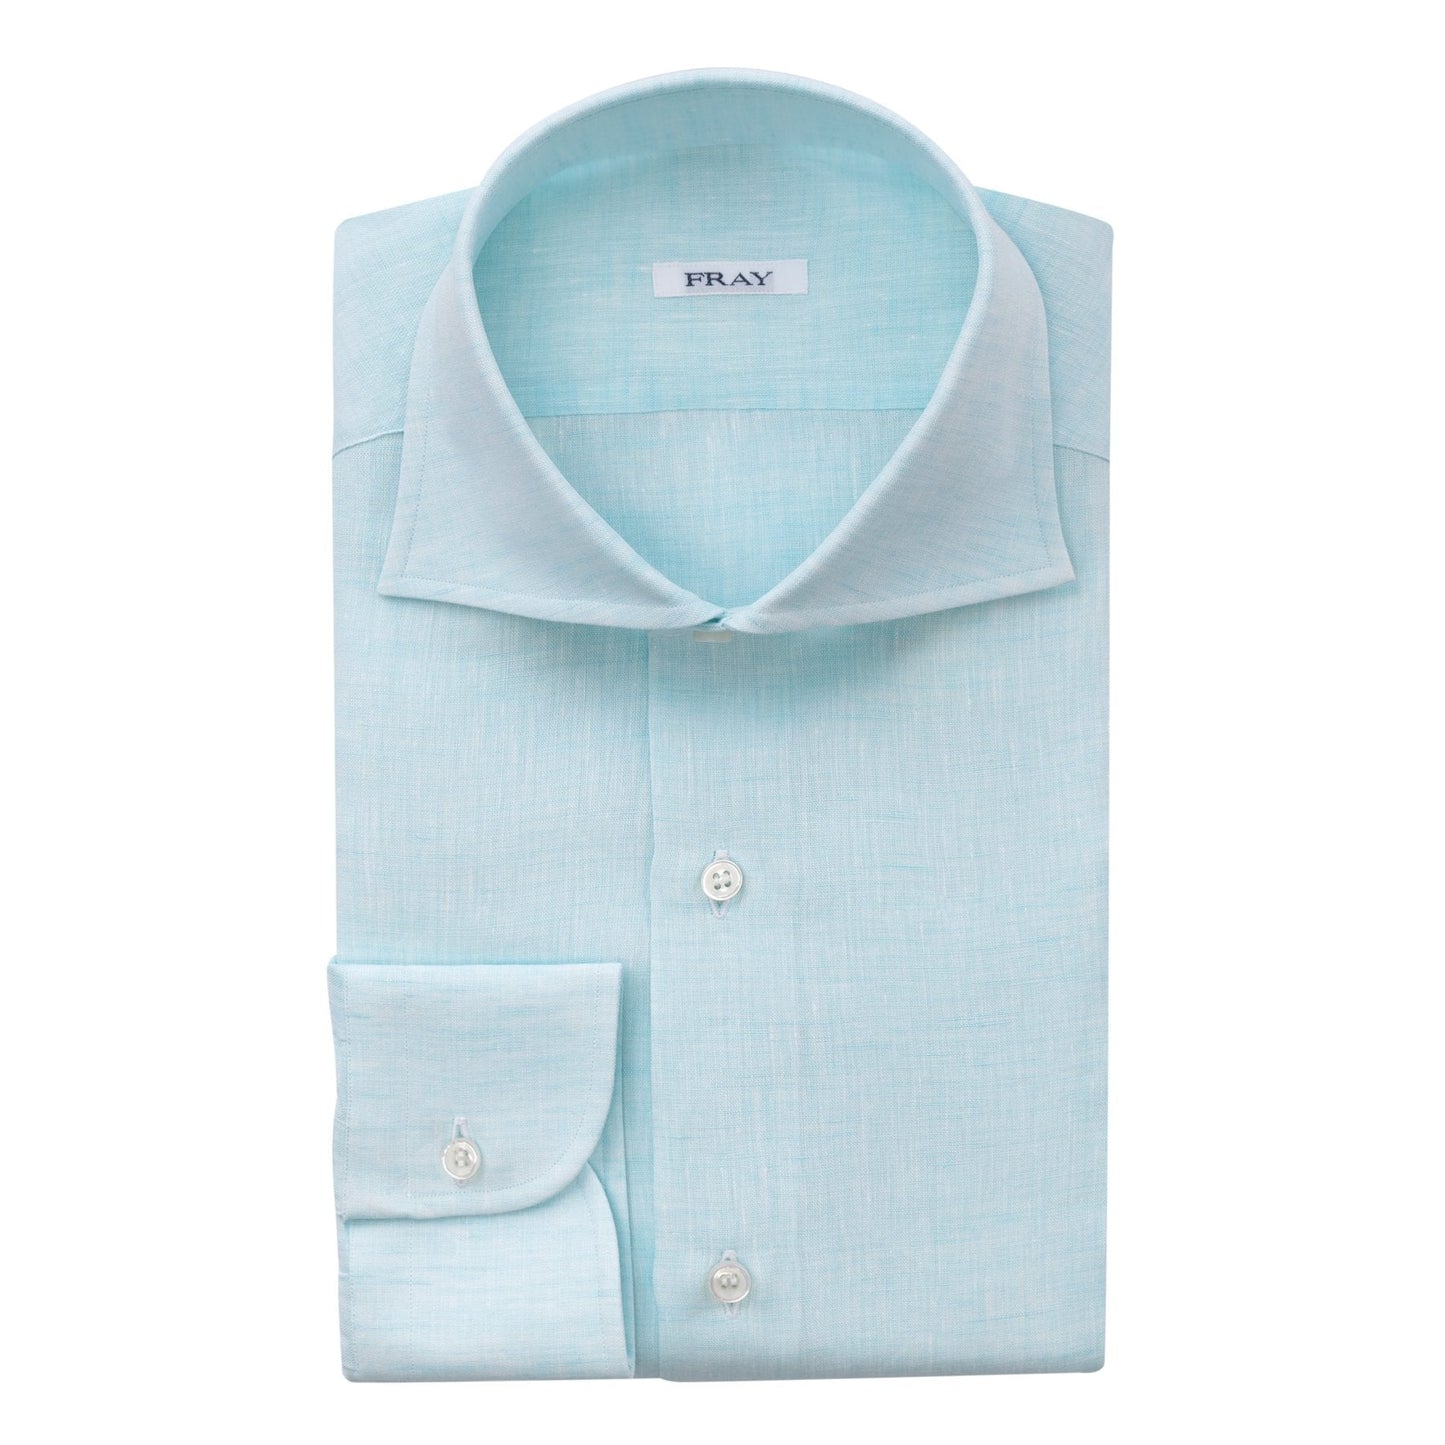 Fray Linen Shirt with Round French Cuff in Mint Green - SARTALE